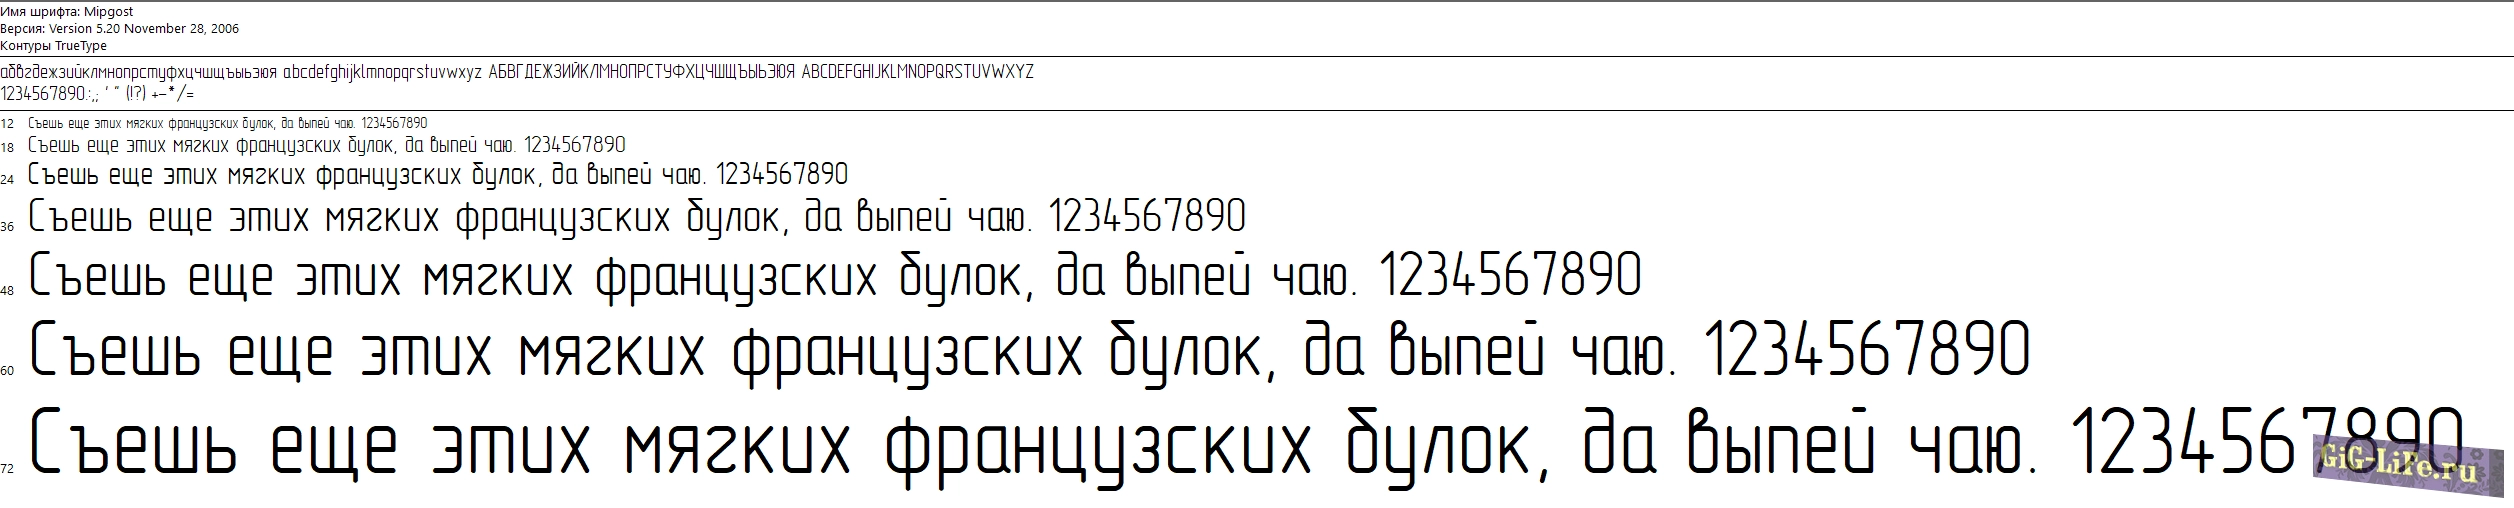 Шрифт — Gost 2.304-81 type-A type-B